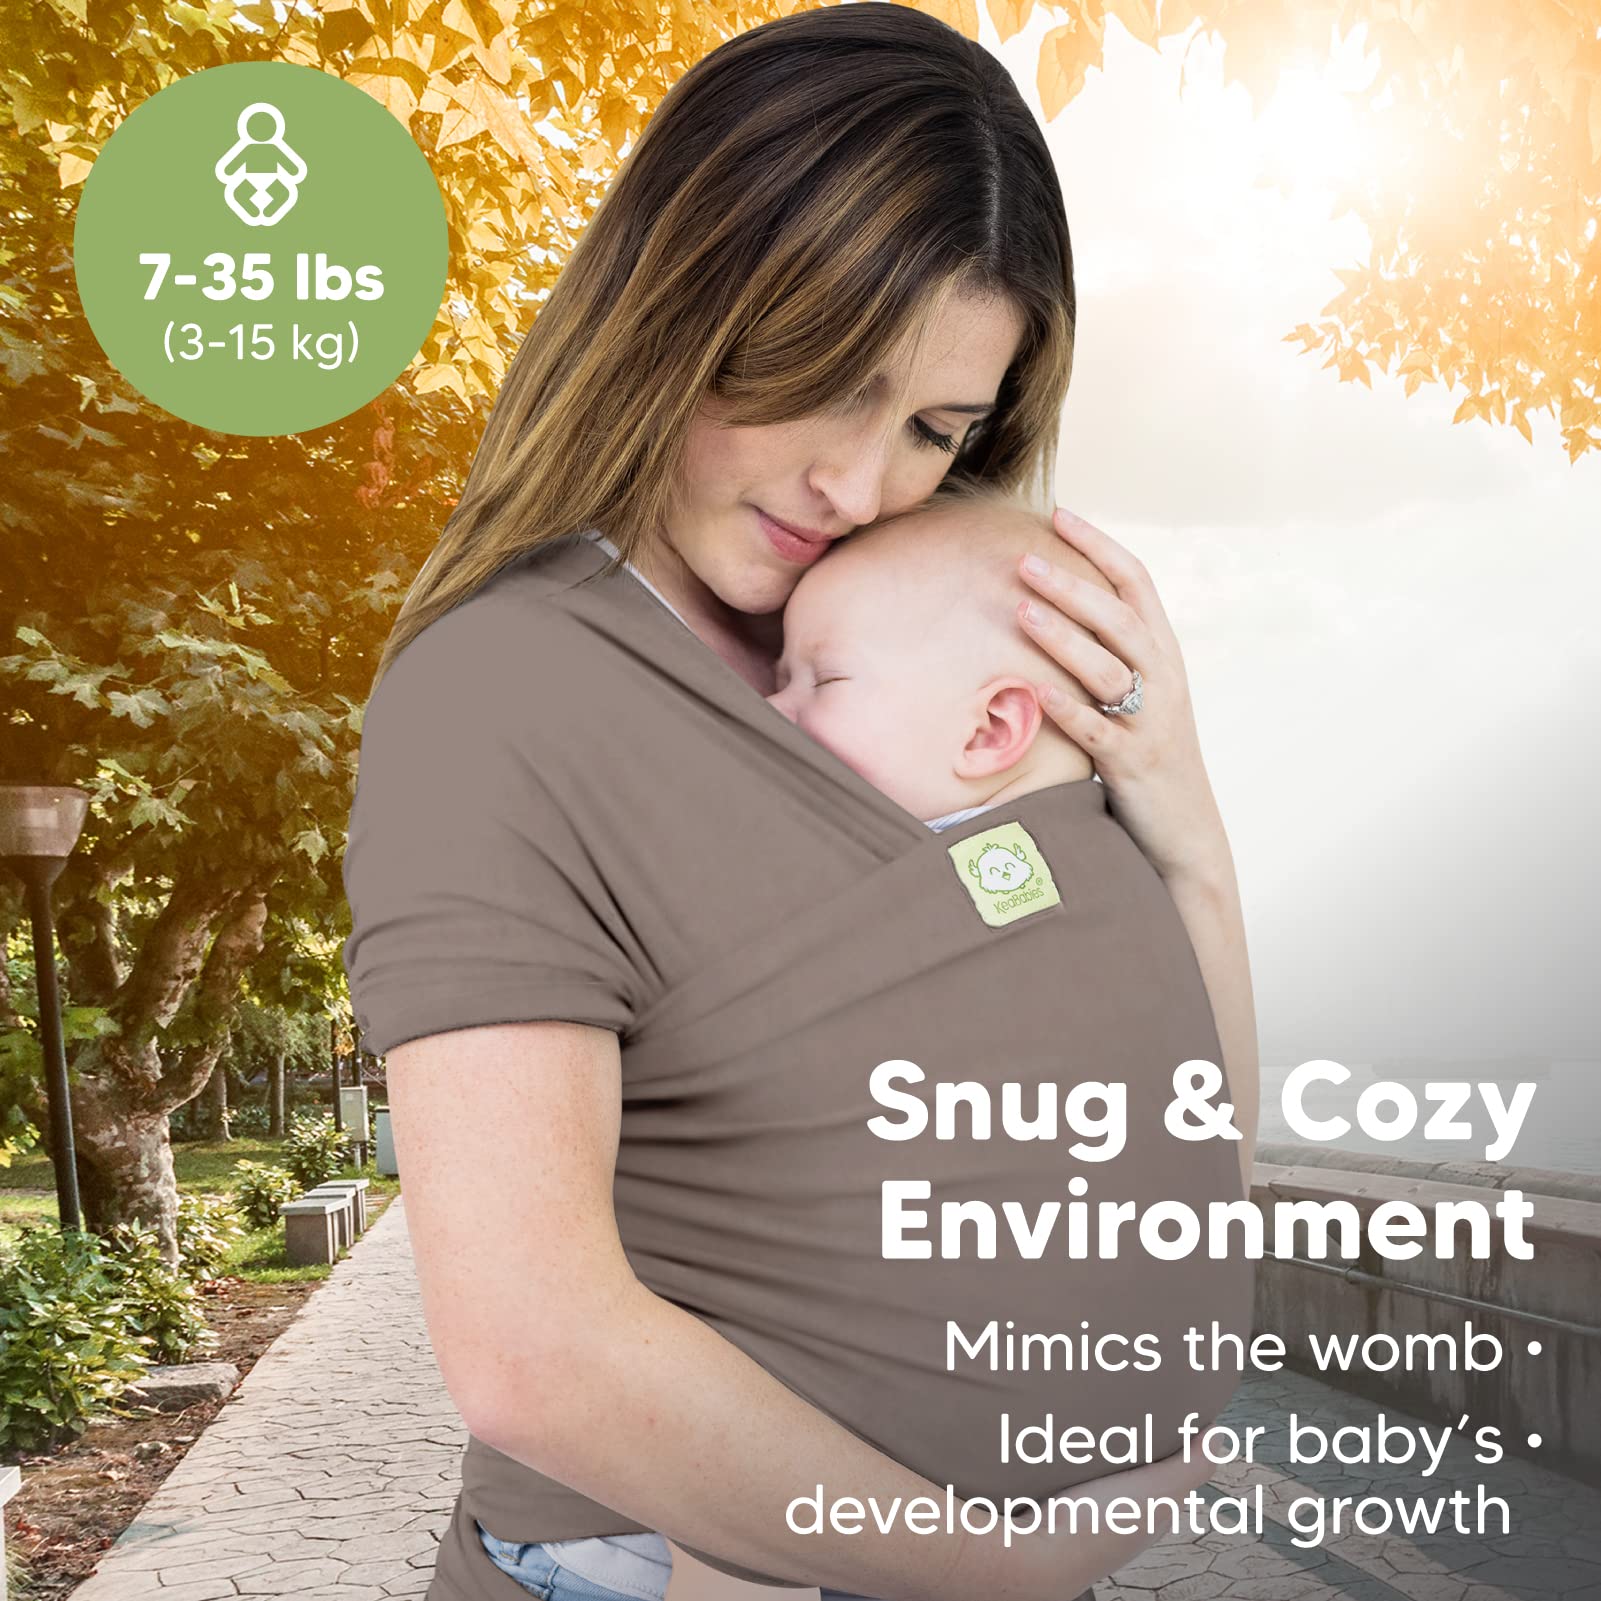 KeaBabies Baby Wrap Carrier - All in 1 Original Breathable Baby Sling, Lightweight Hands Free Baby Carrier Sling, Baby Carrier Wrap, Baby Carriers for Newborn, Infant, Baby Wraps Carrier (Copper Gray)